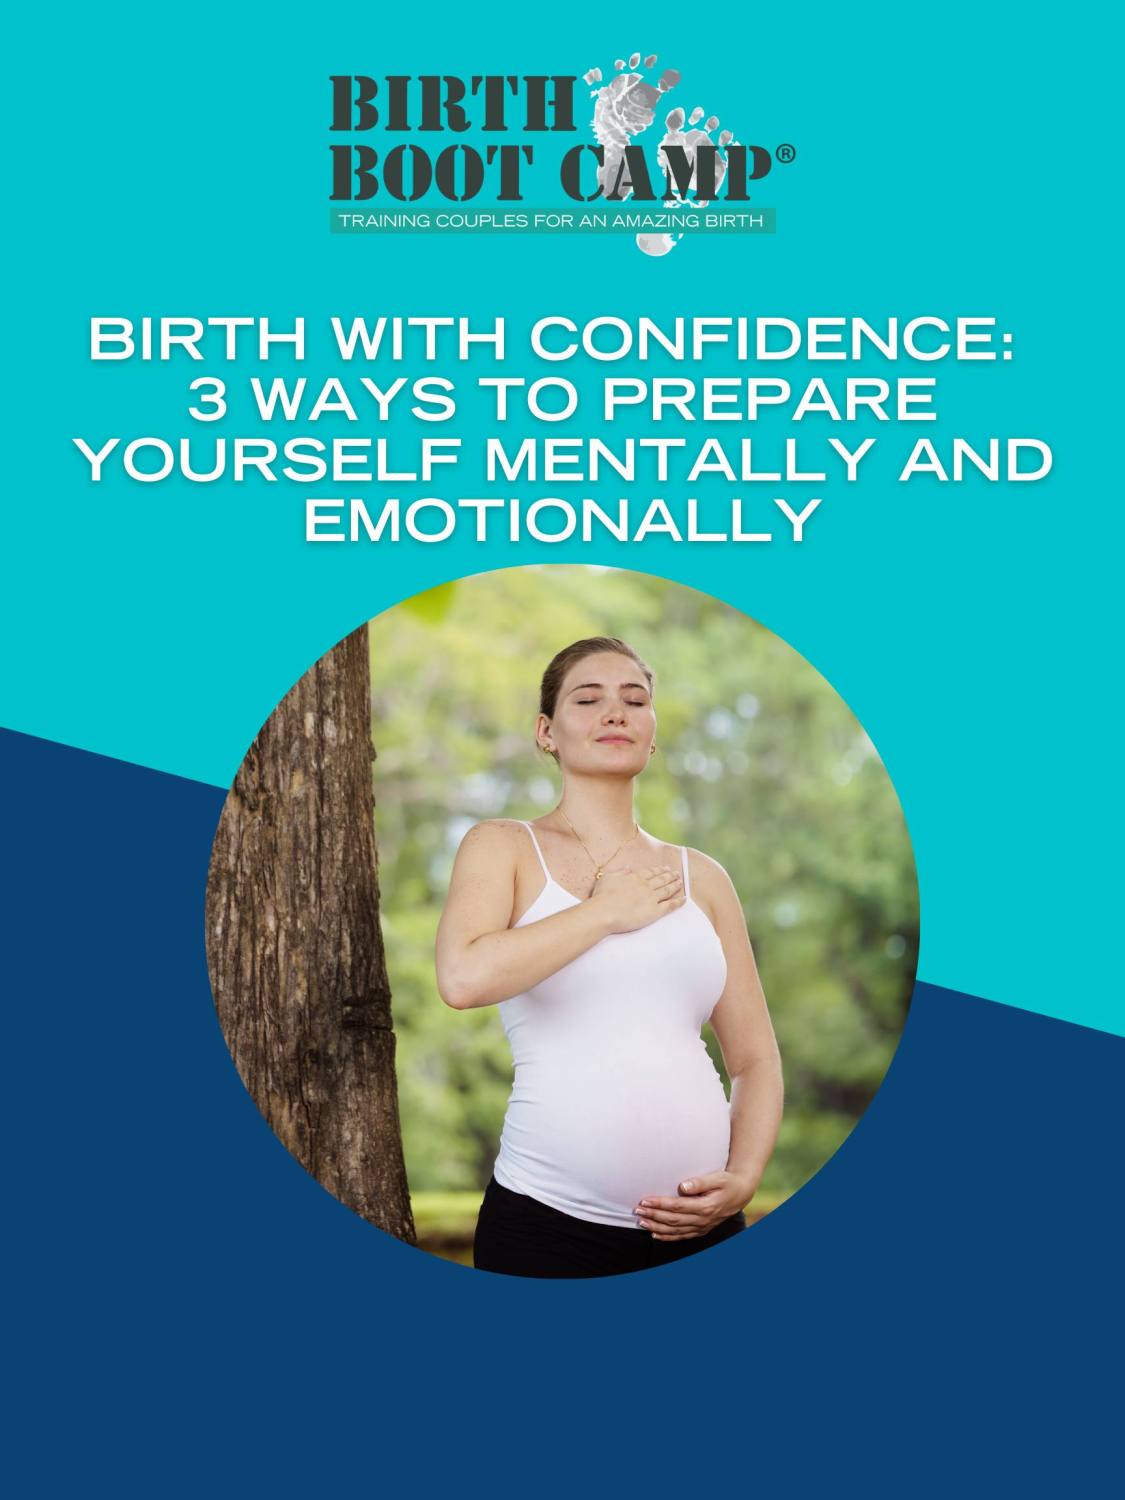 3 Ways to Prepare Yourself for Birth – Mentally and Emotionally